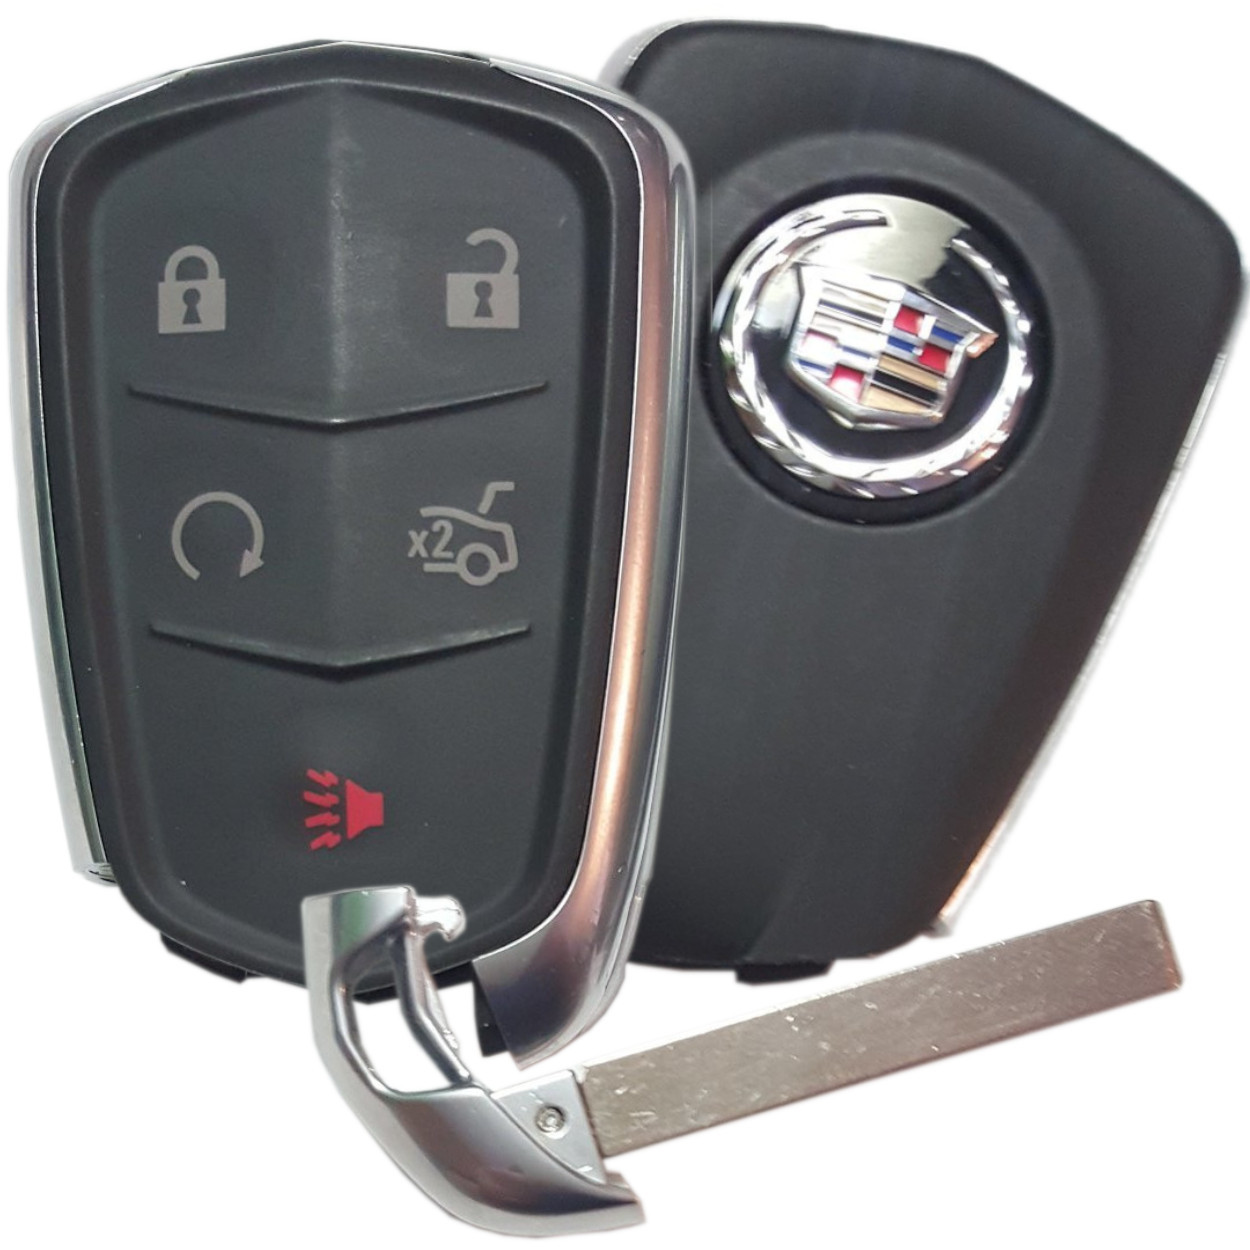 Learn more About the Upcoming New Model of Cadillac key